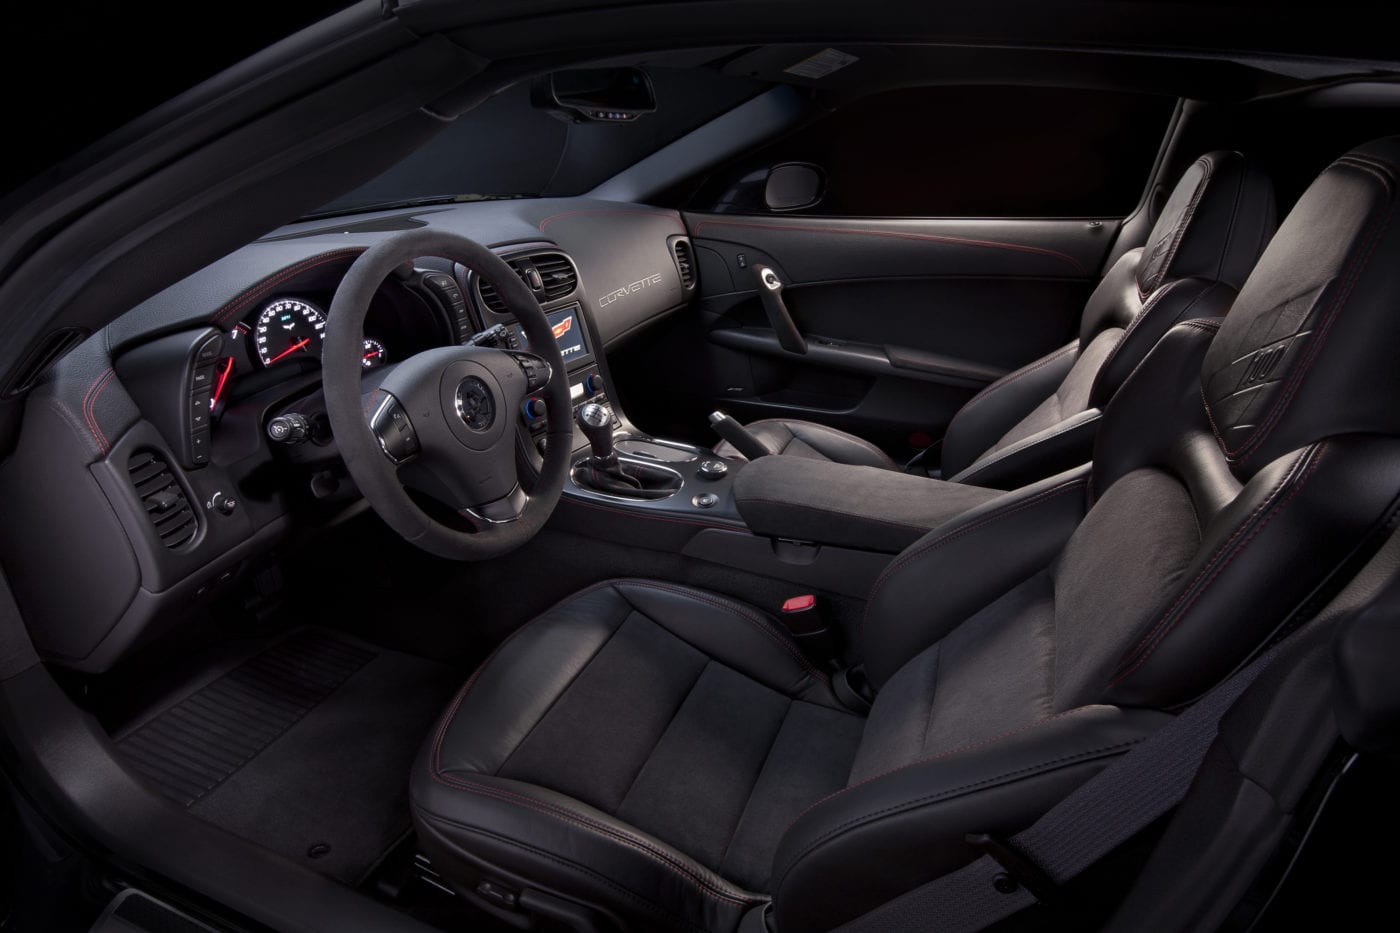 Who could say no to this inviting C6 Corvette Z06 interior?